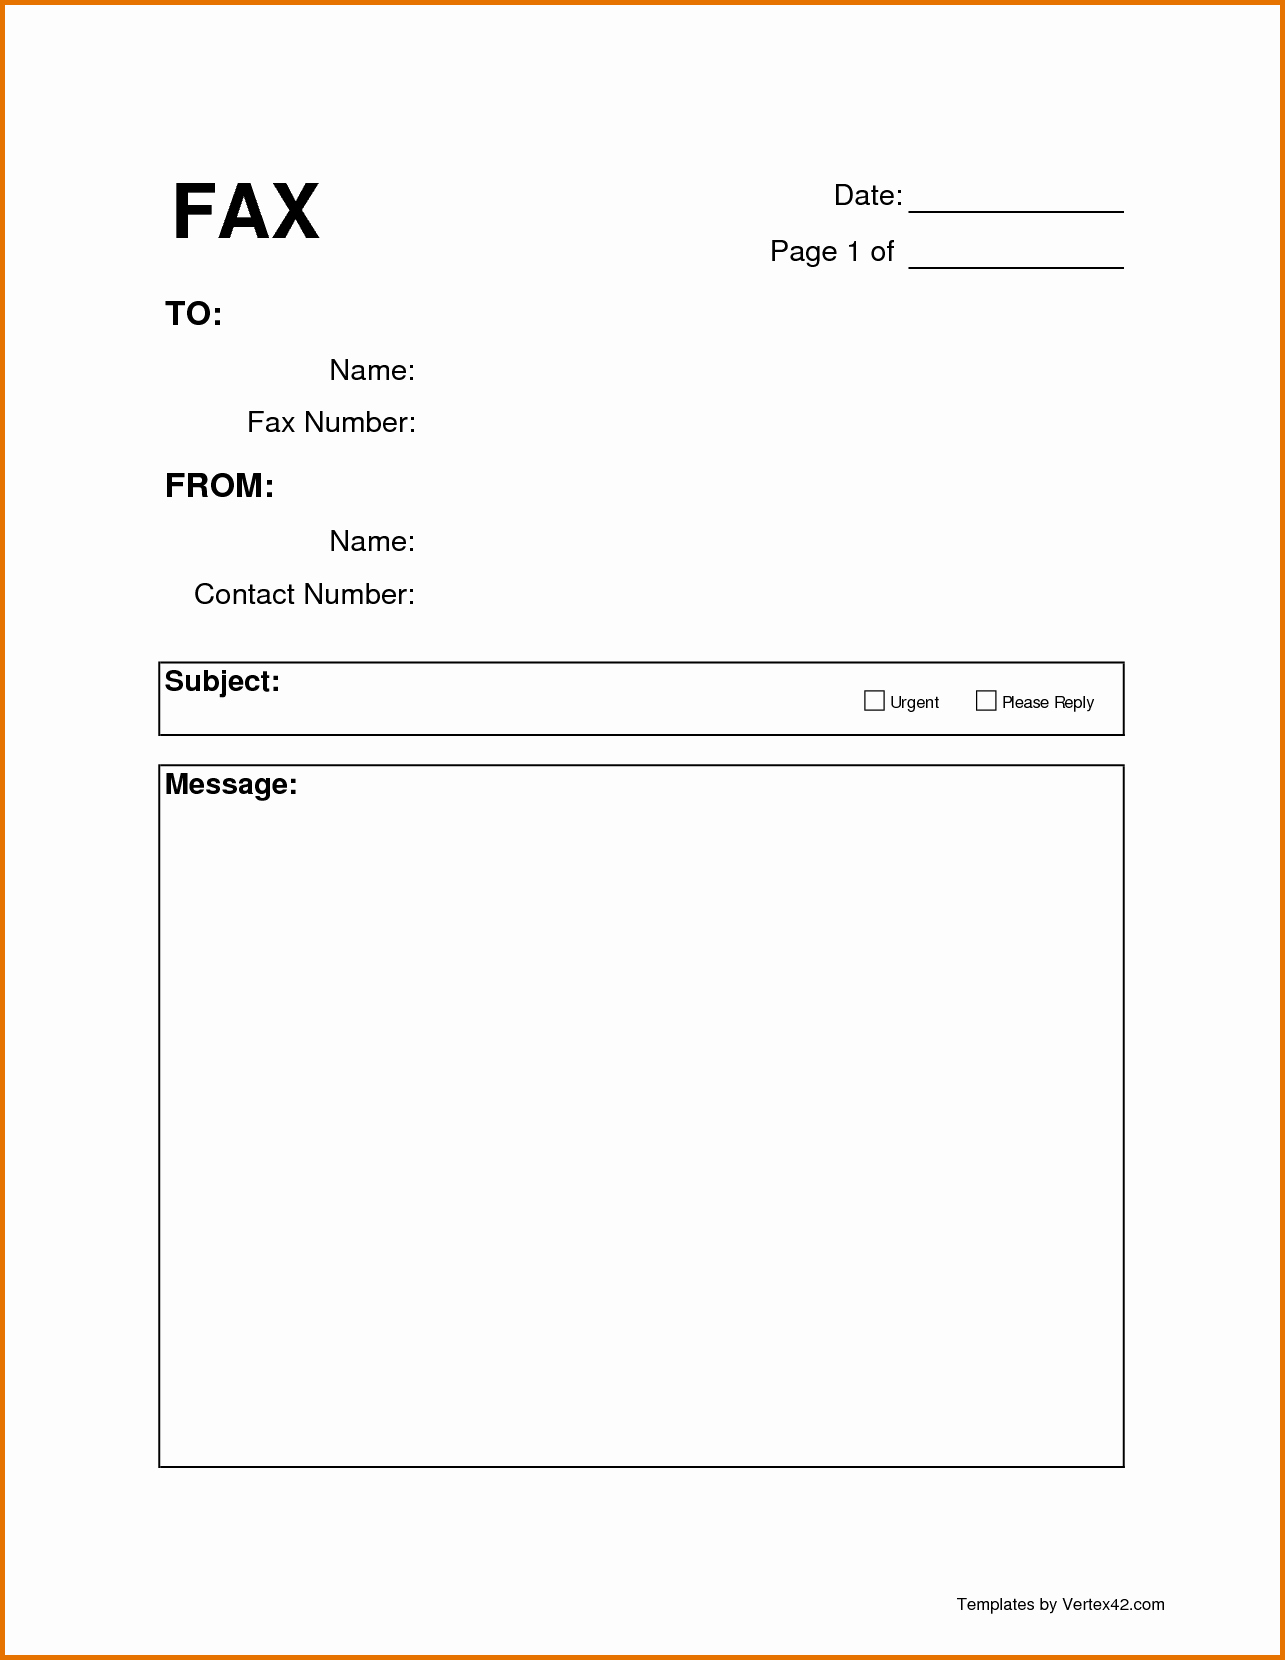 Print A Fax Cover Sheet Unique 4 Printable Fax Cover Sheetsreference Letters Words